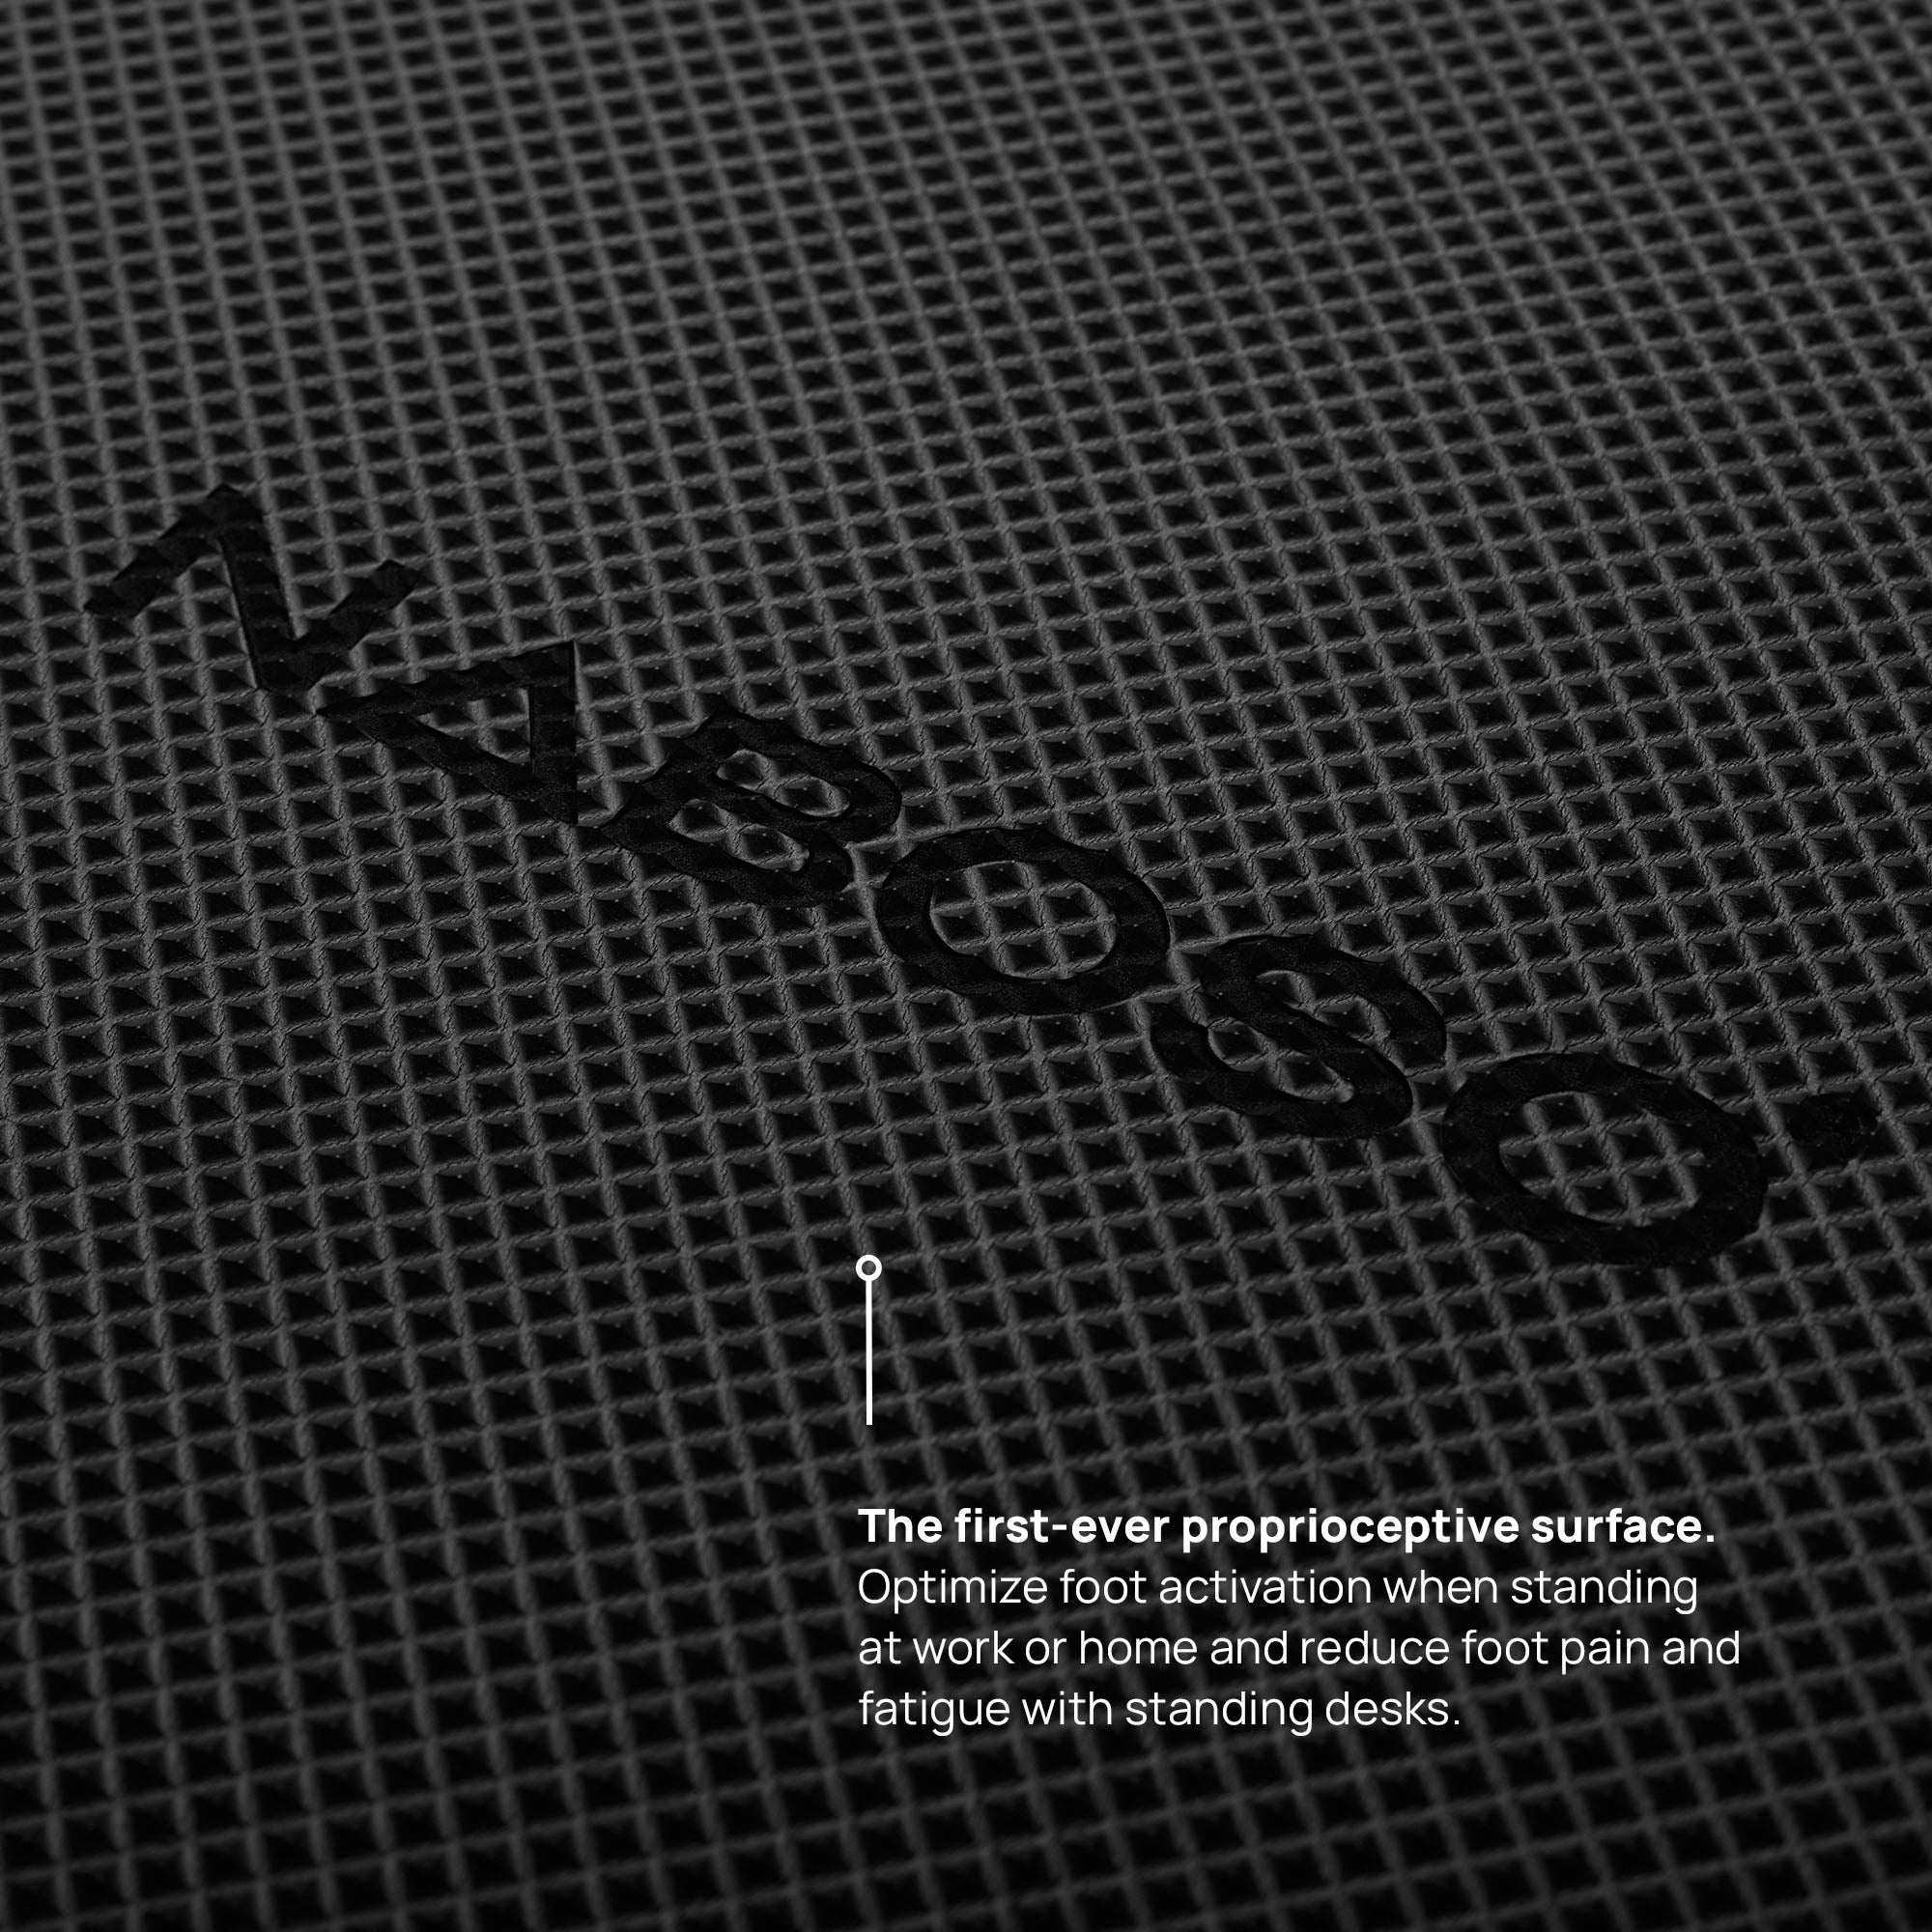 Close up of Naboso Standing Mat showing it's the first-ever proprioceptive surface